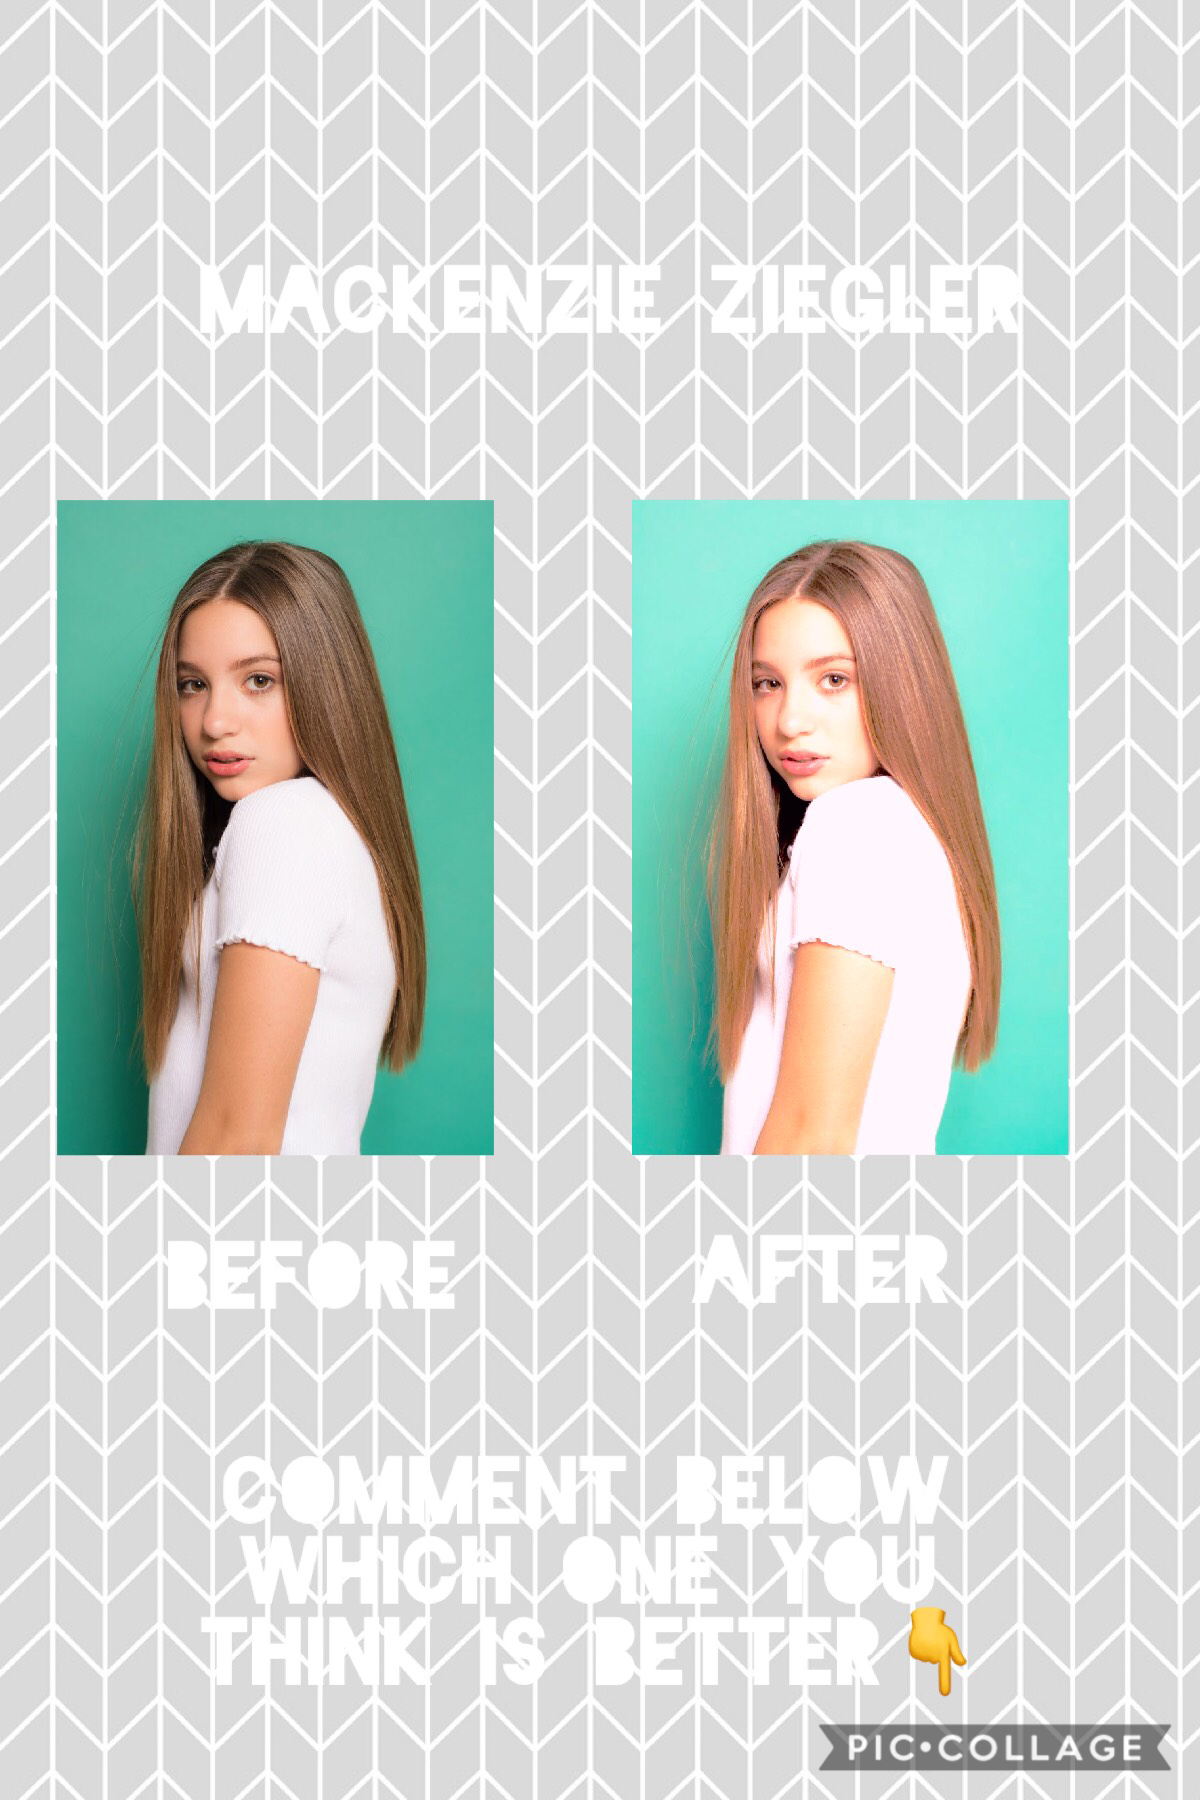 Before and after: Mackenzie Ziegler 

Which on do you think is better?